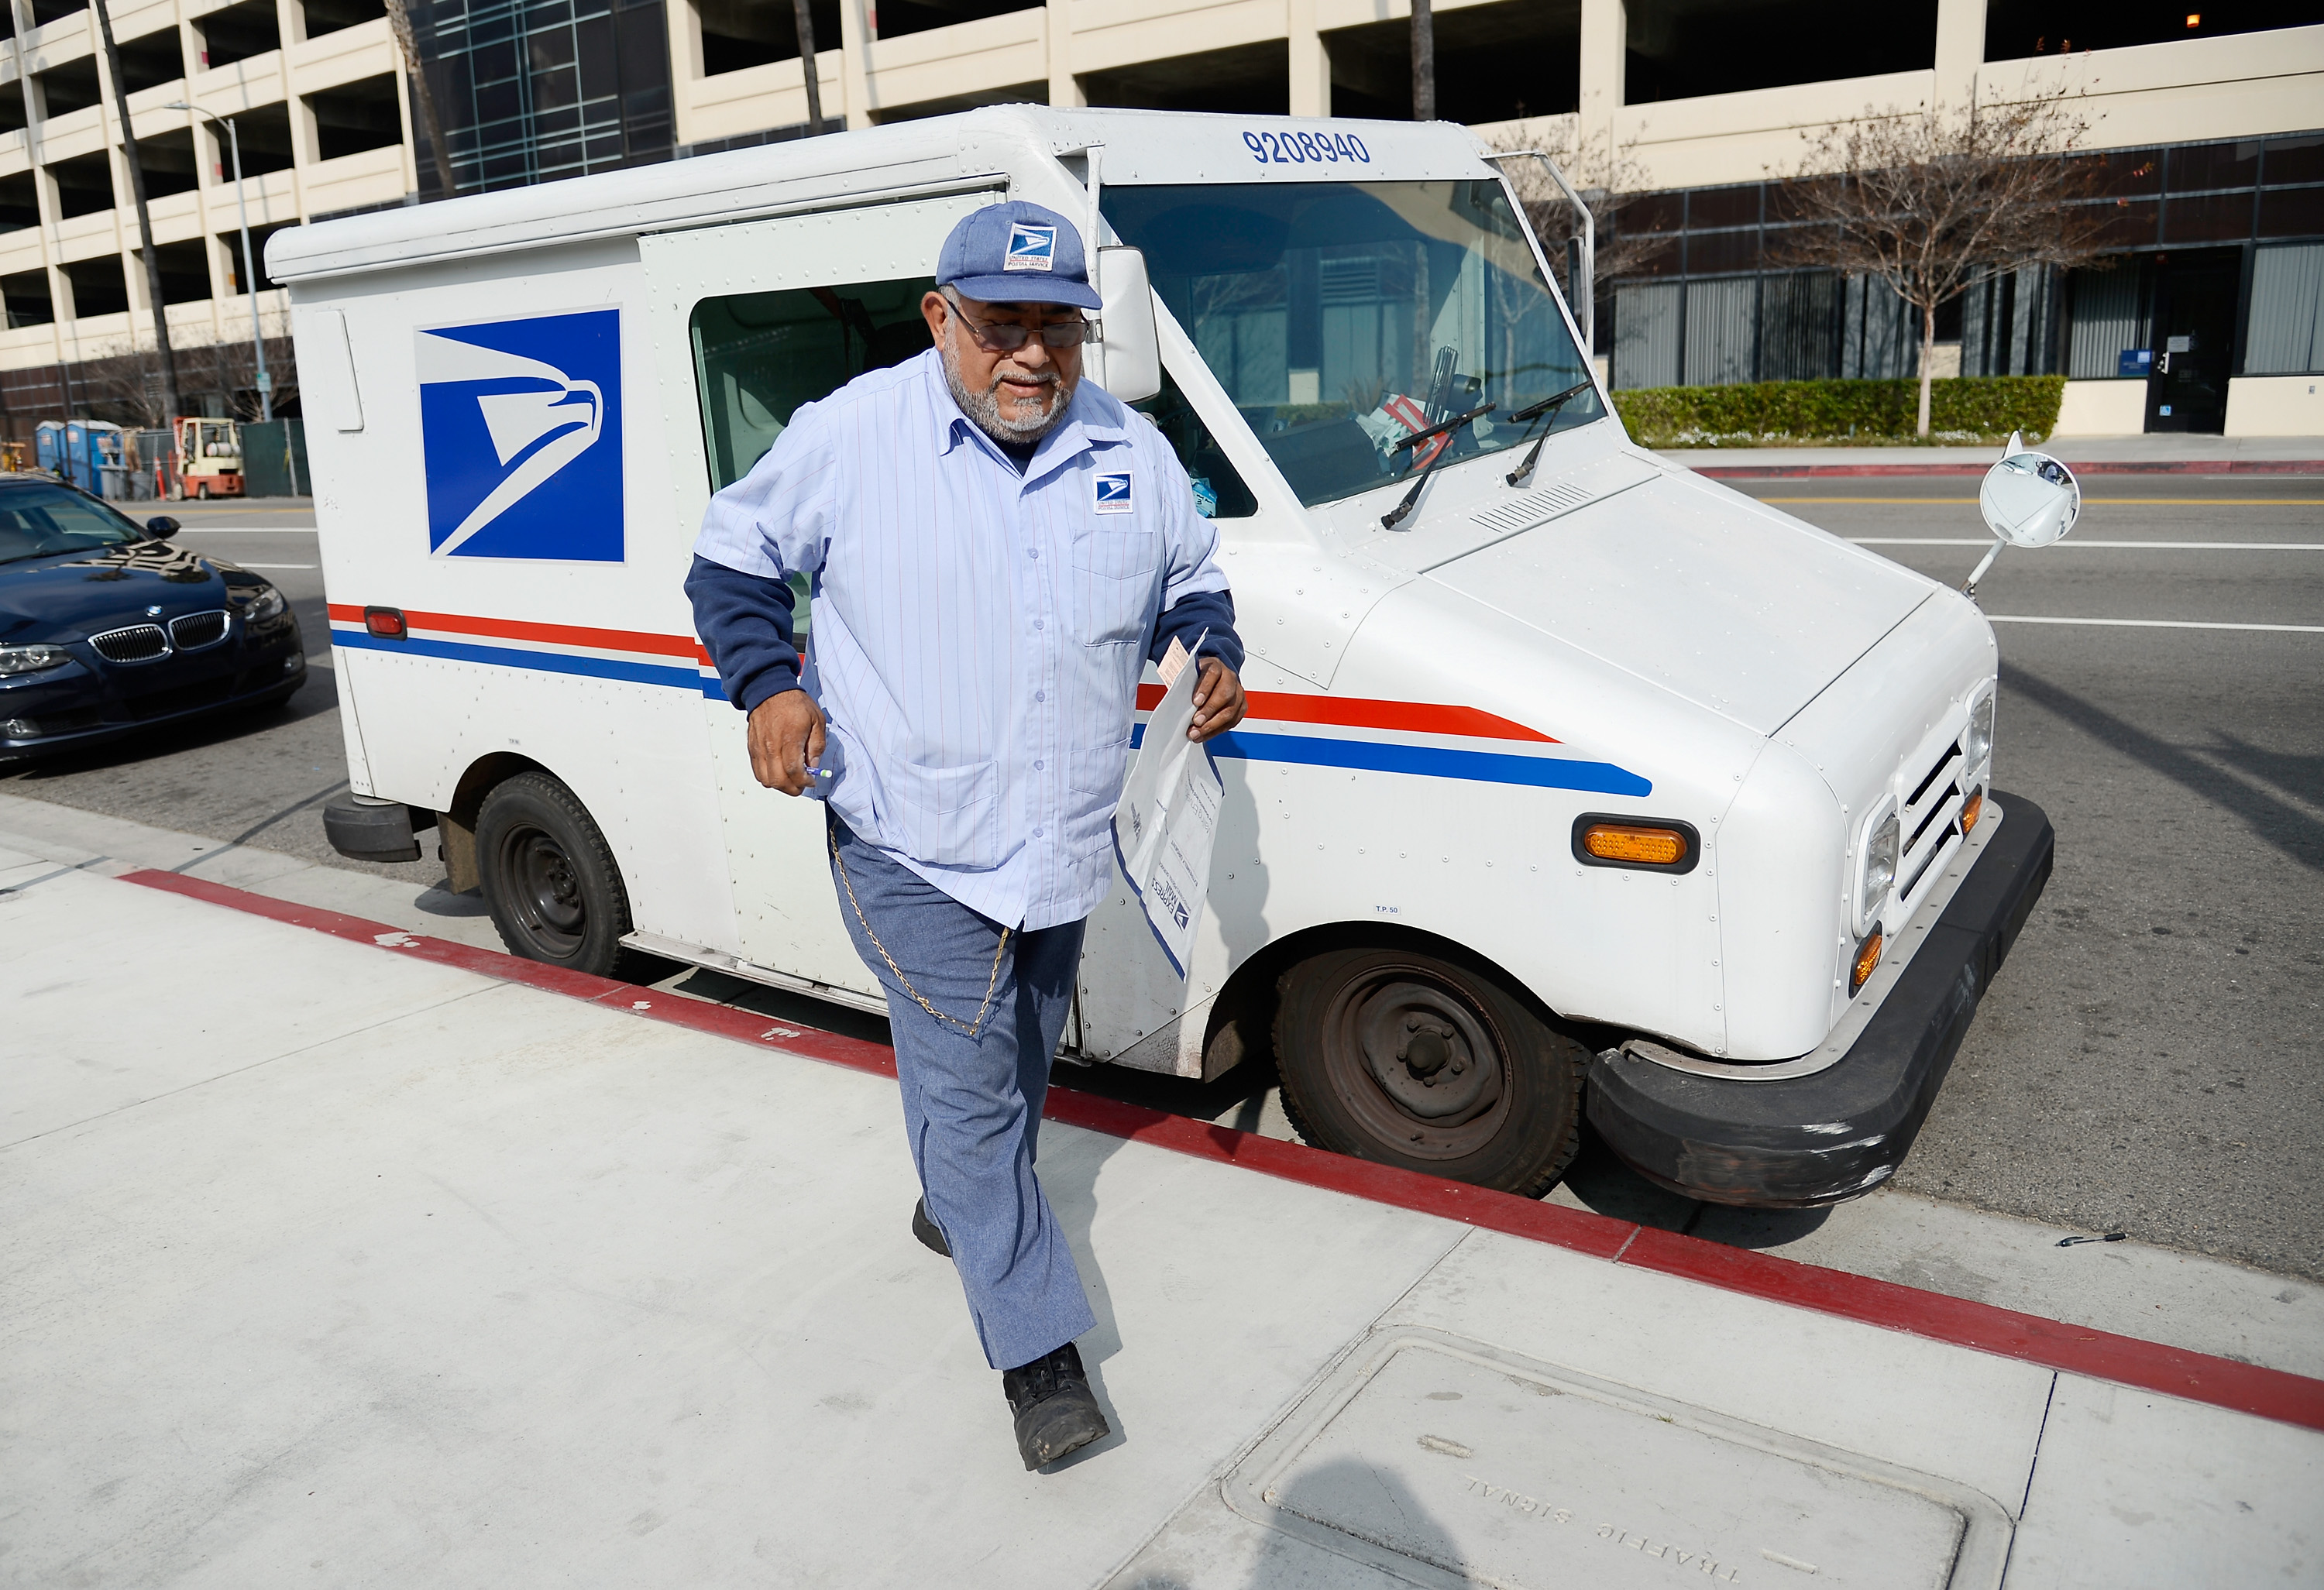 Postal Service Announces End To Saturday Delivery